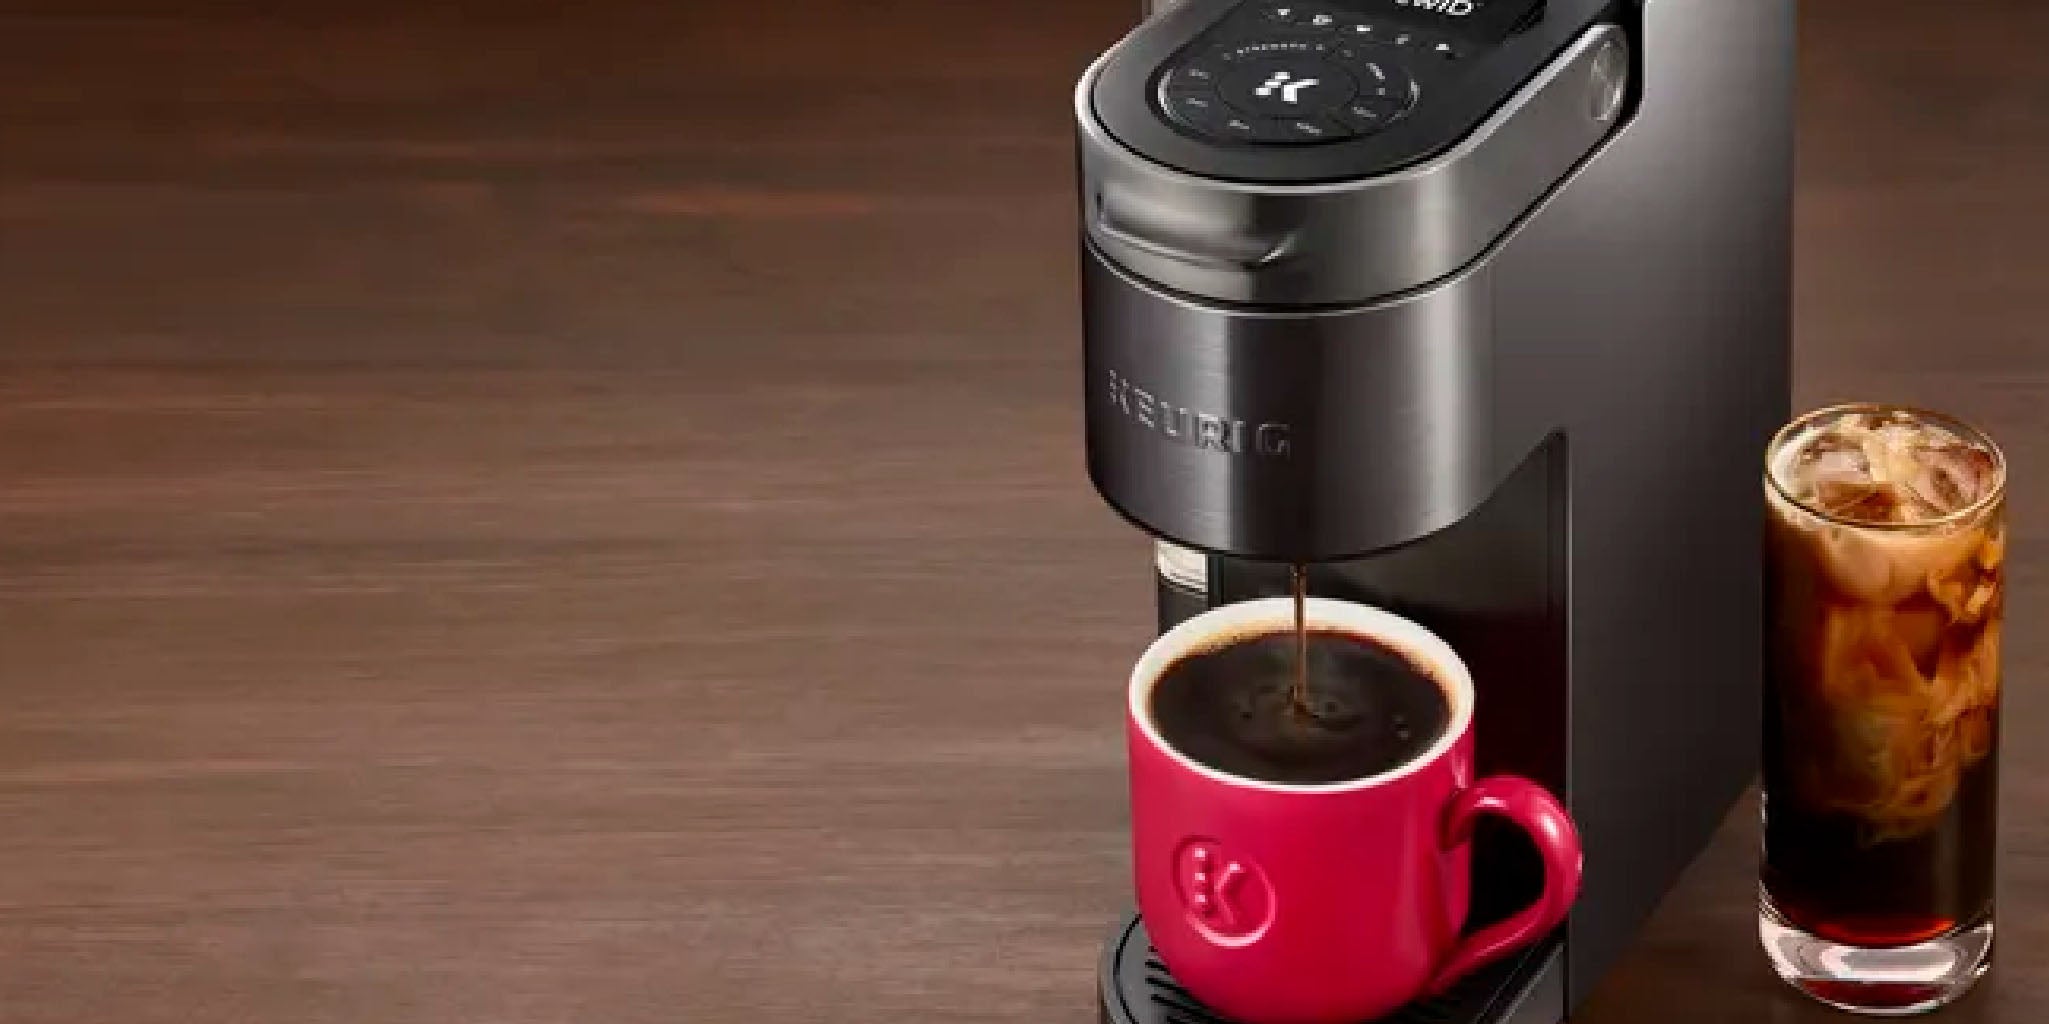 Bean To Cup Coffee Machines: What They Are & Benefits